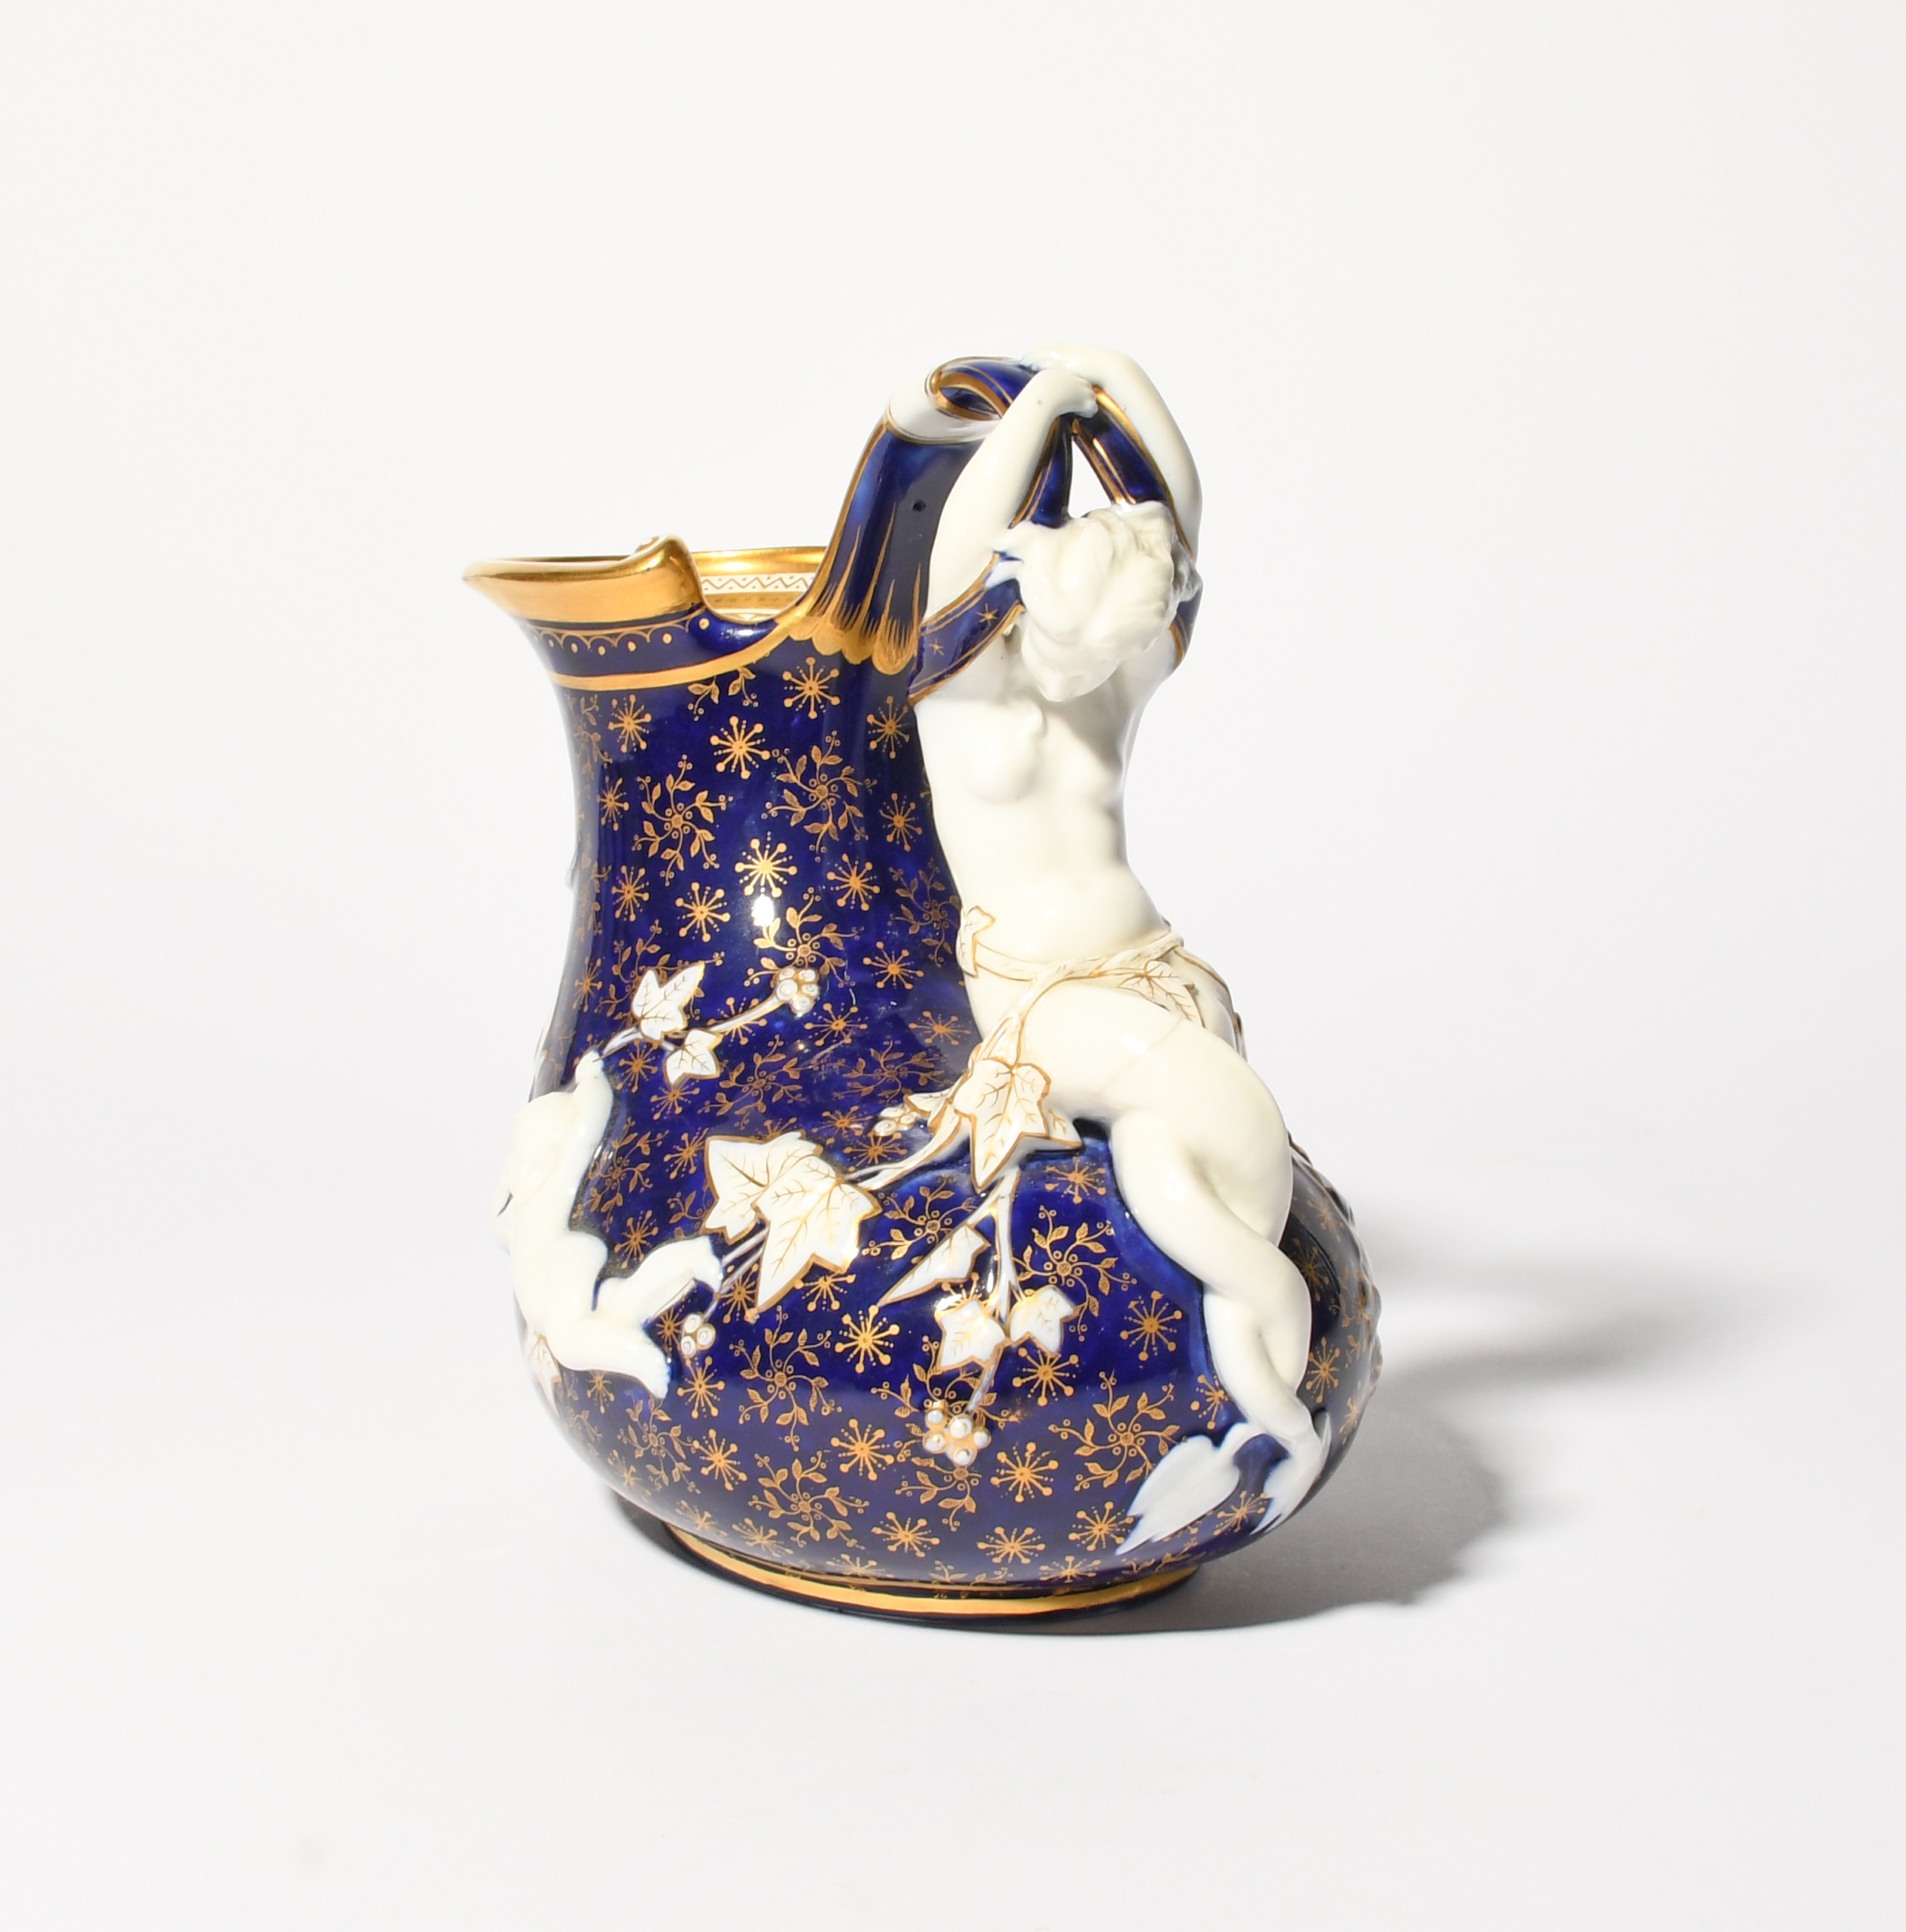 A rare Minton porcelain 'Mermaid' ewer, c.1880, of askos shape, moulded with putti and a horned - Image 2 of 5